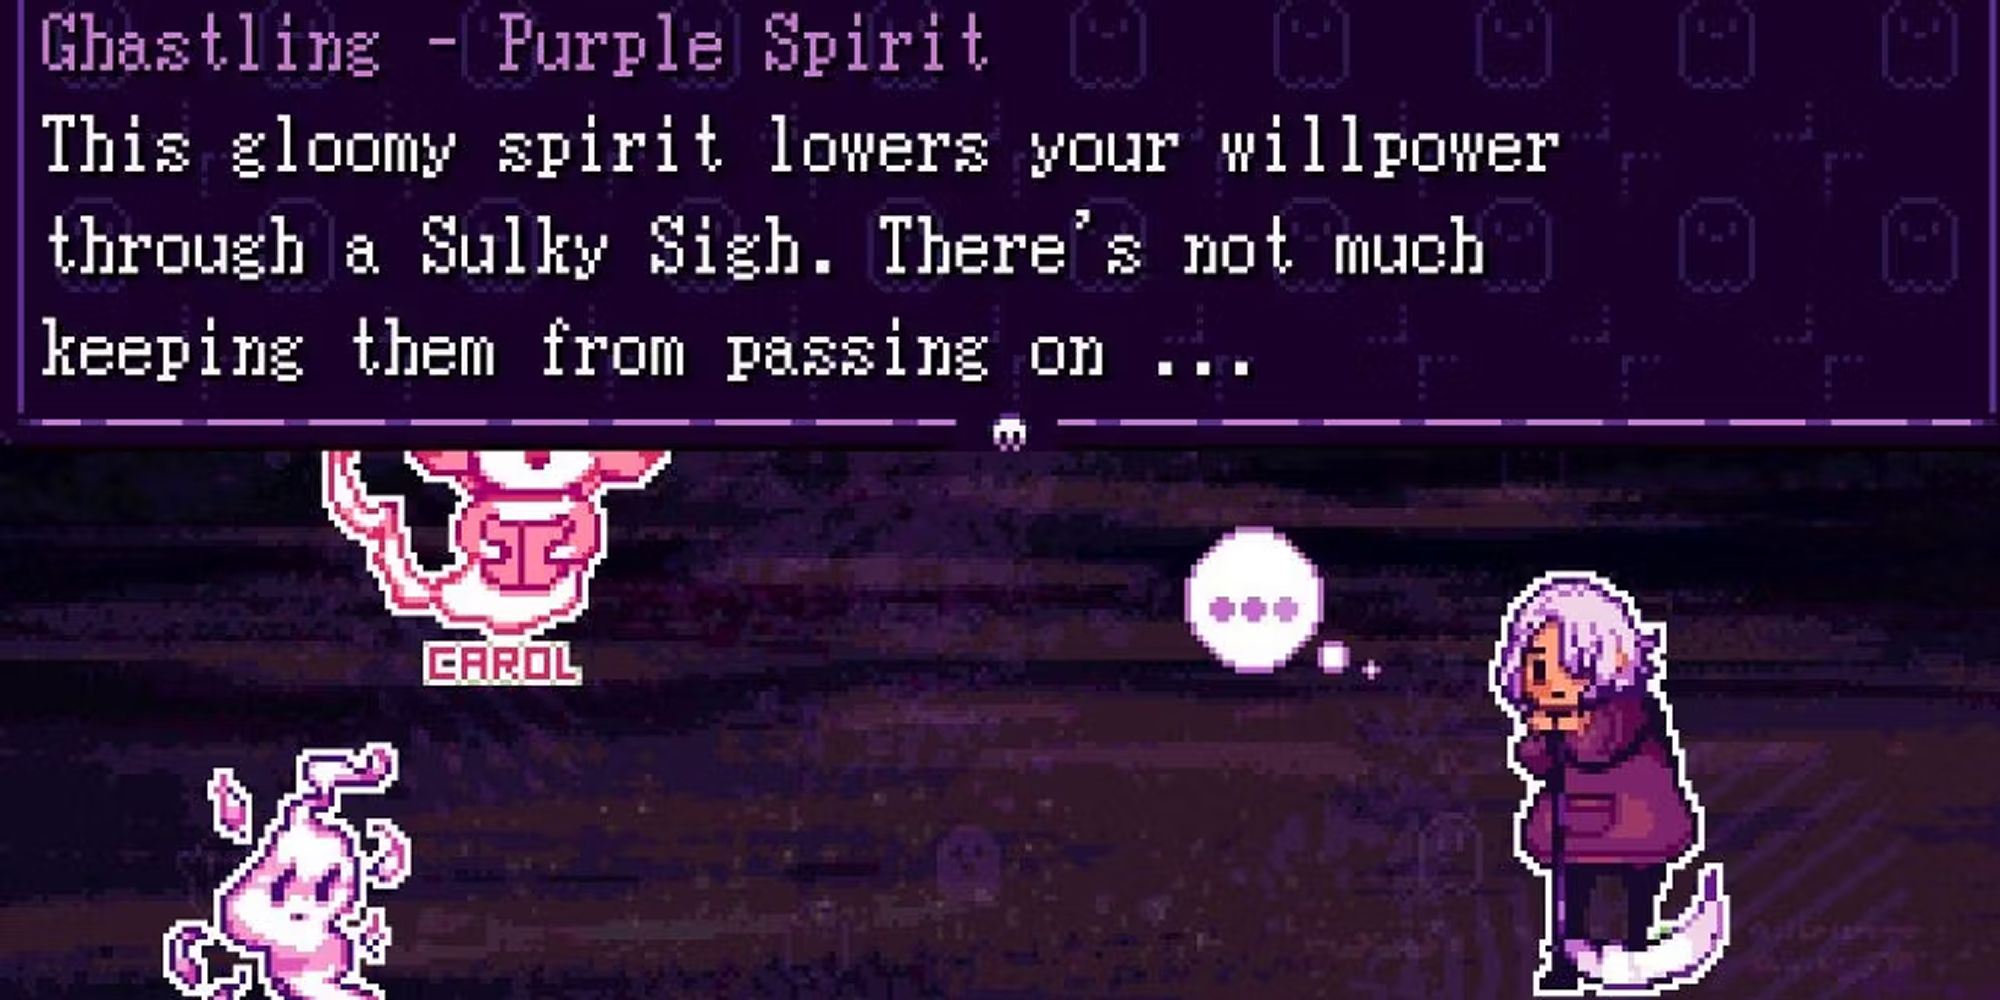 Grimm's Hollow Talking With Purple Spirit